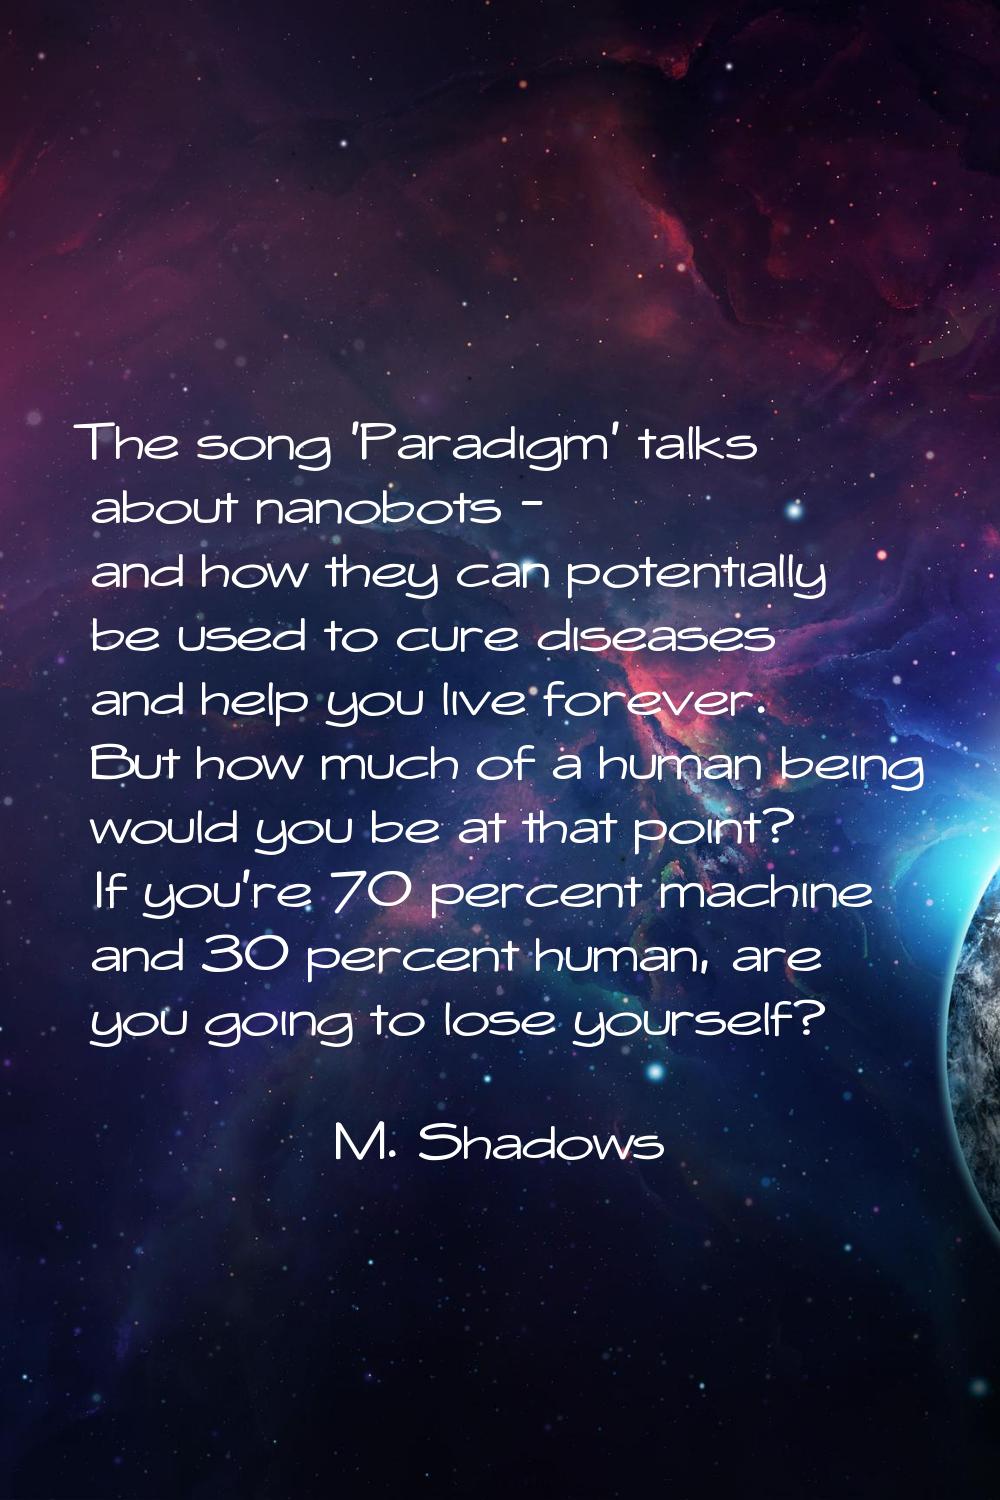 The song 'Paradigm' talks about nanobots - and how they can potentially be used to cure diseases an